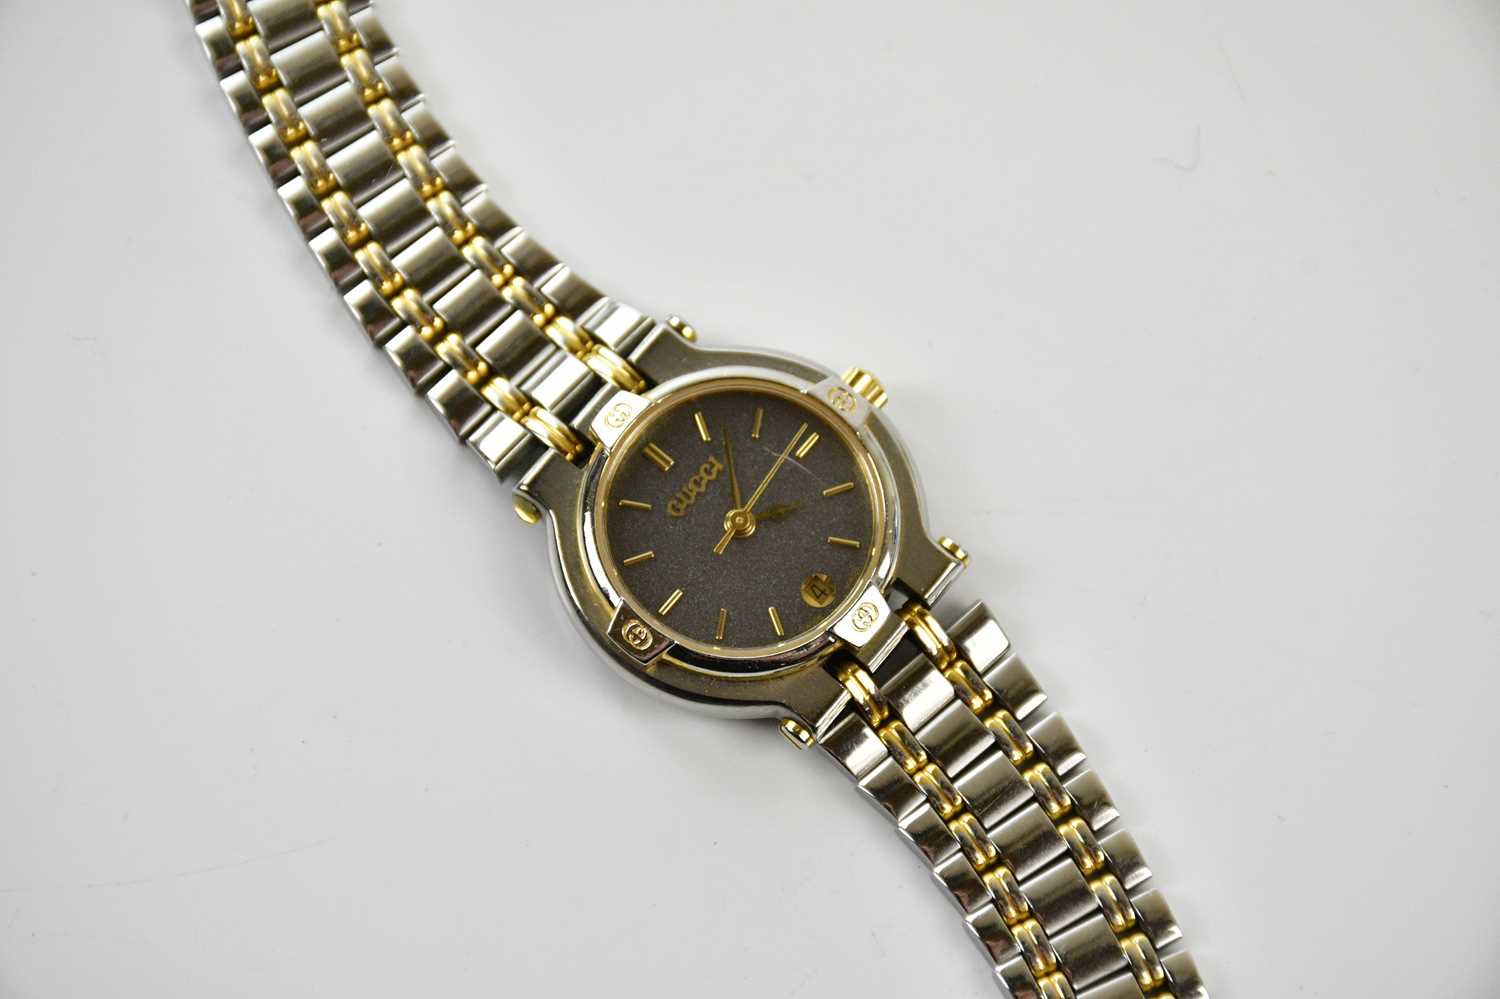 GUCCI; a vintage 9000L stainless steel and gold tone quartz wristwatch with black dial, 17cm strap - Image 2 of 3